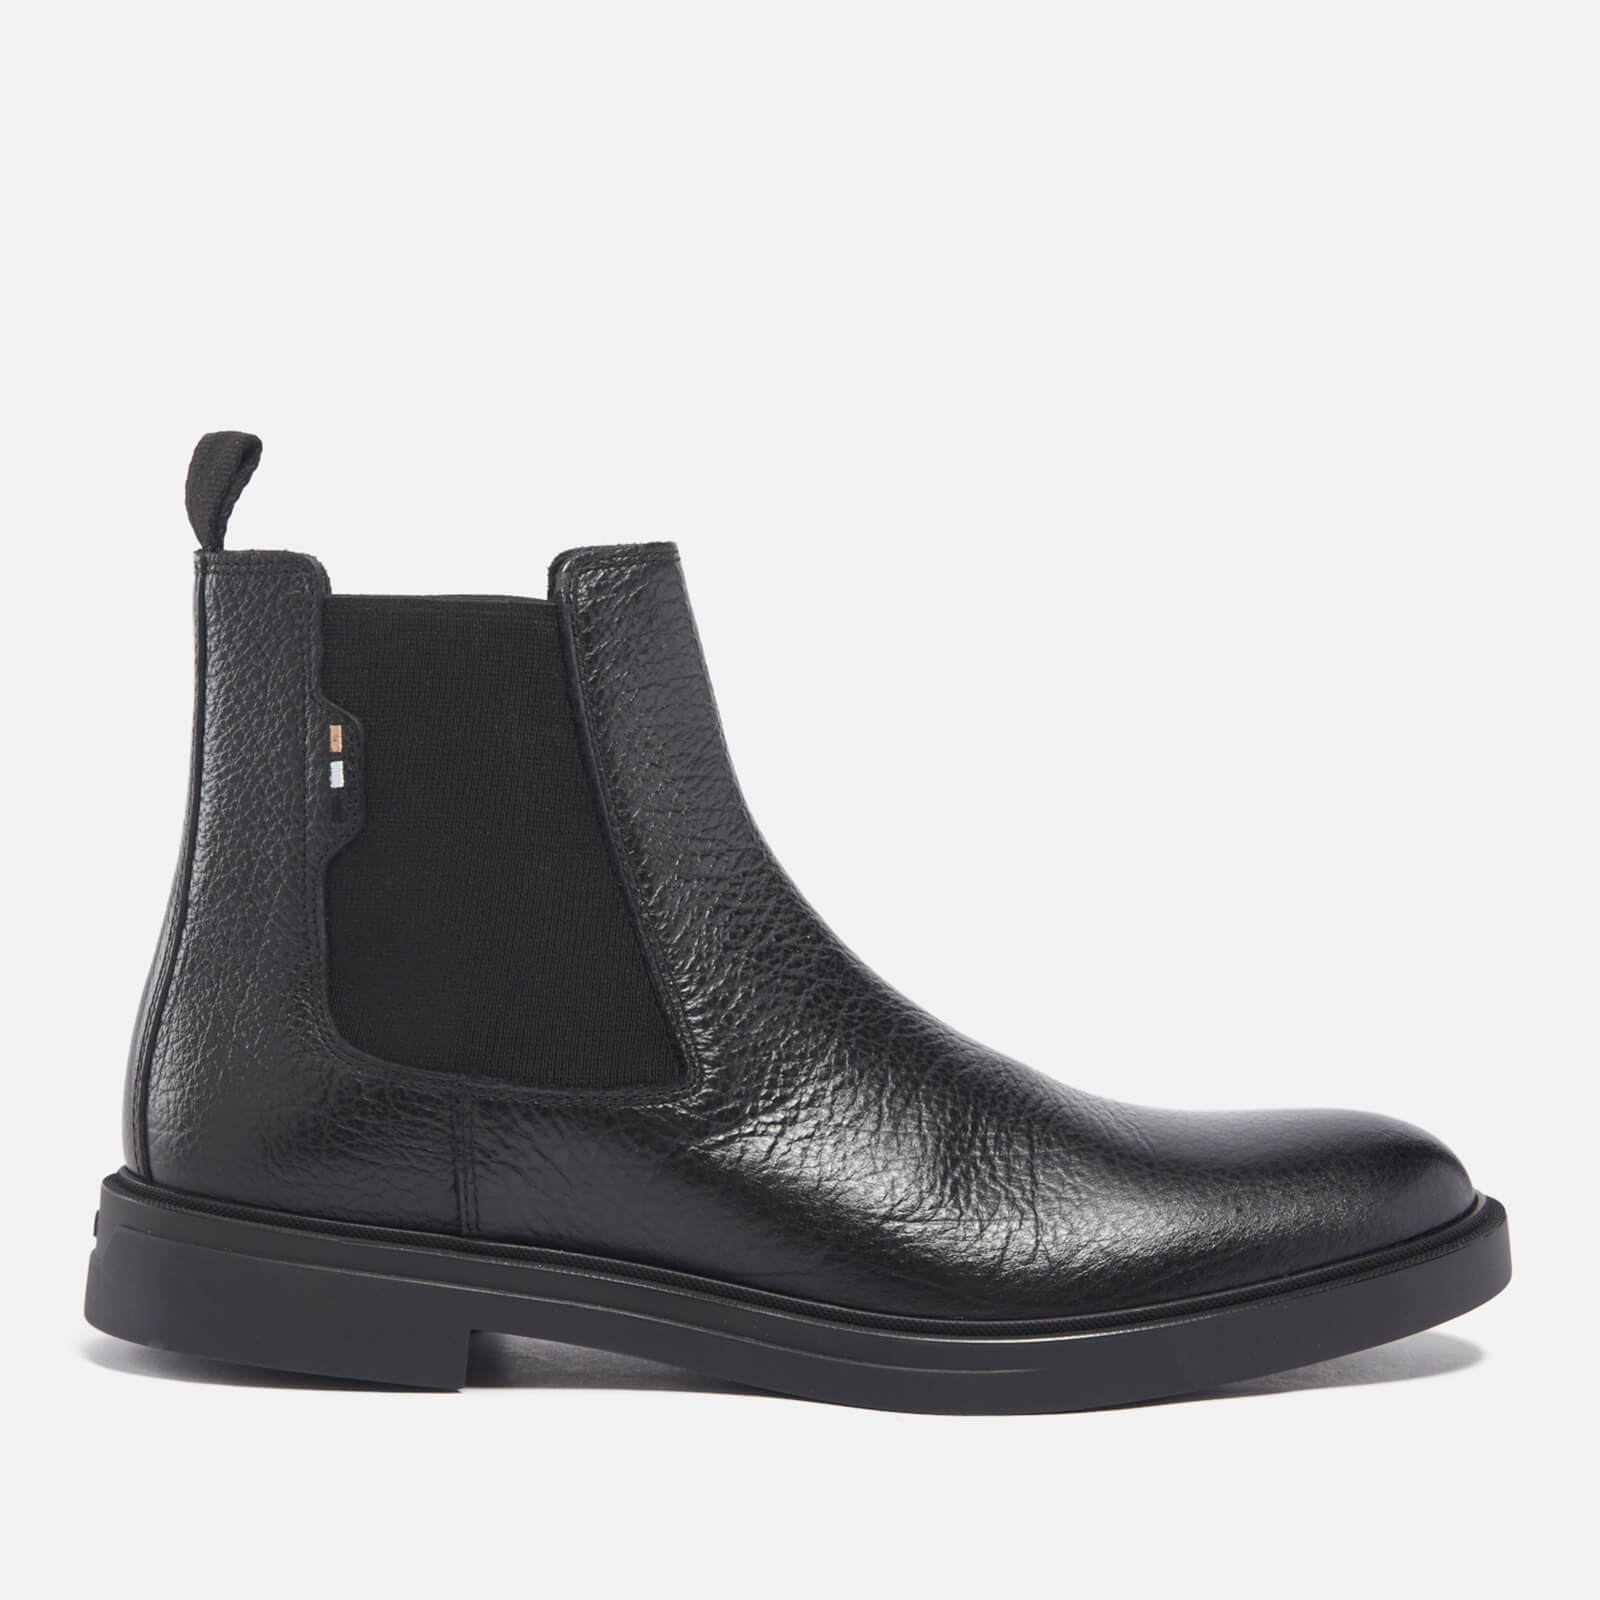 BOSS Men’s Calev Leather Chelsea Boots